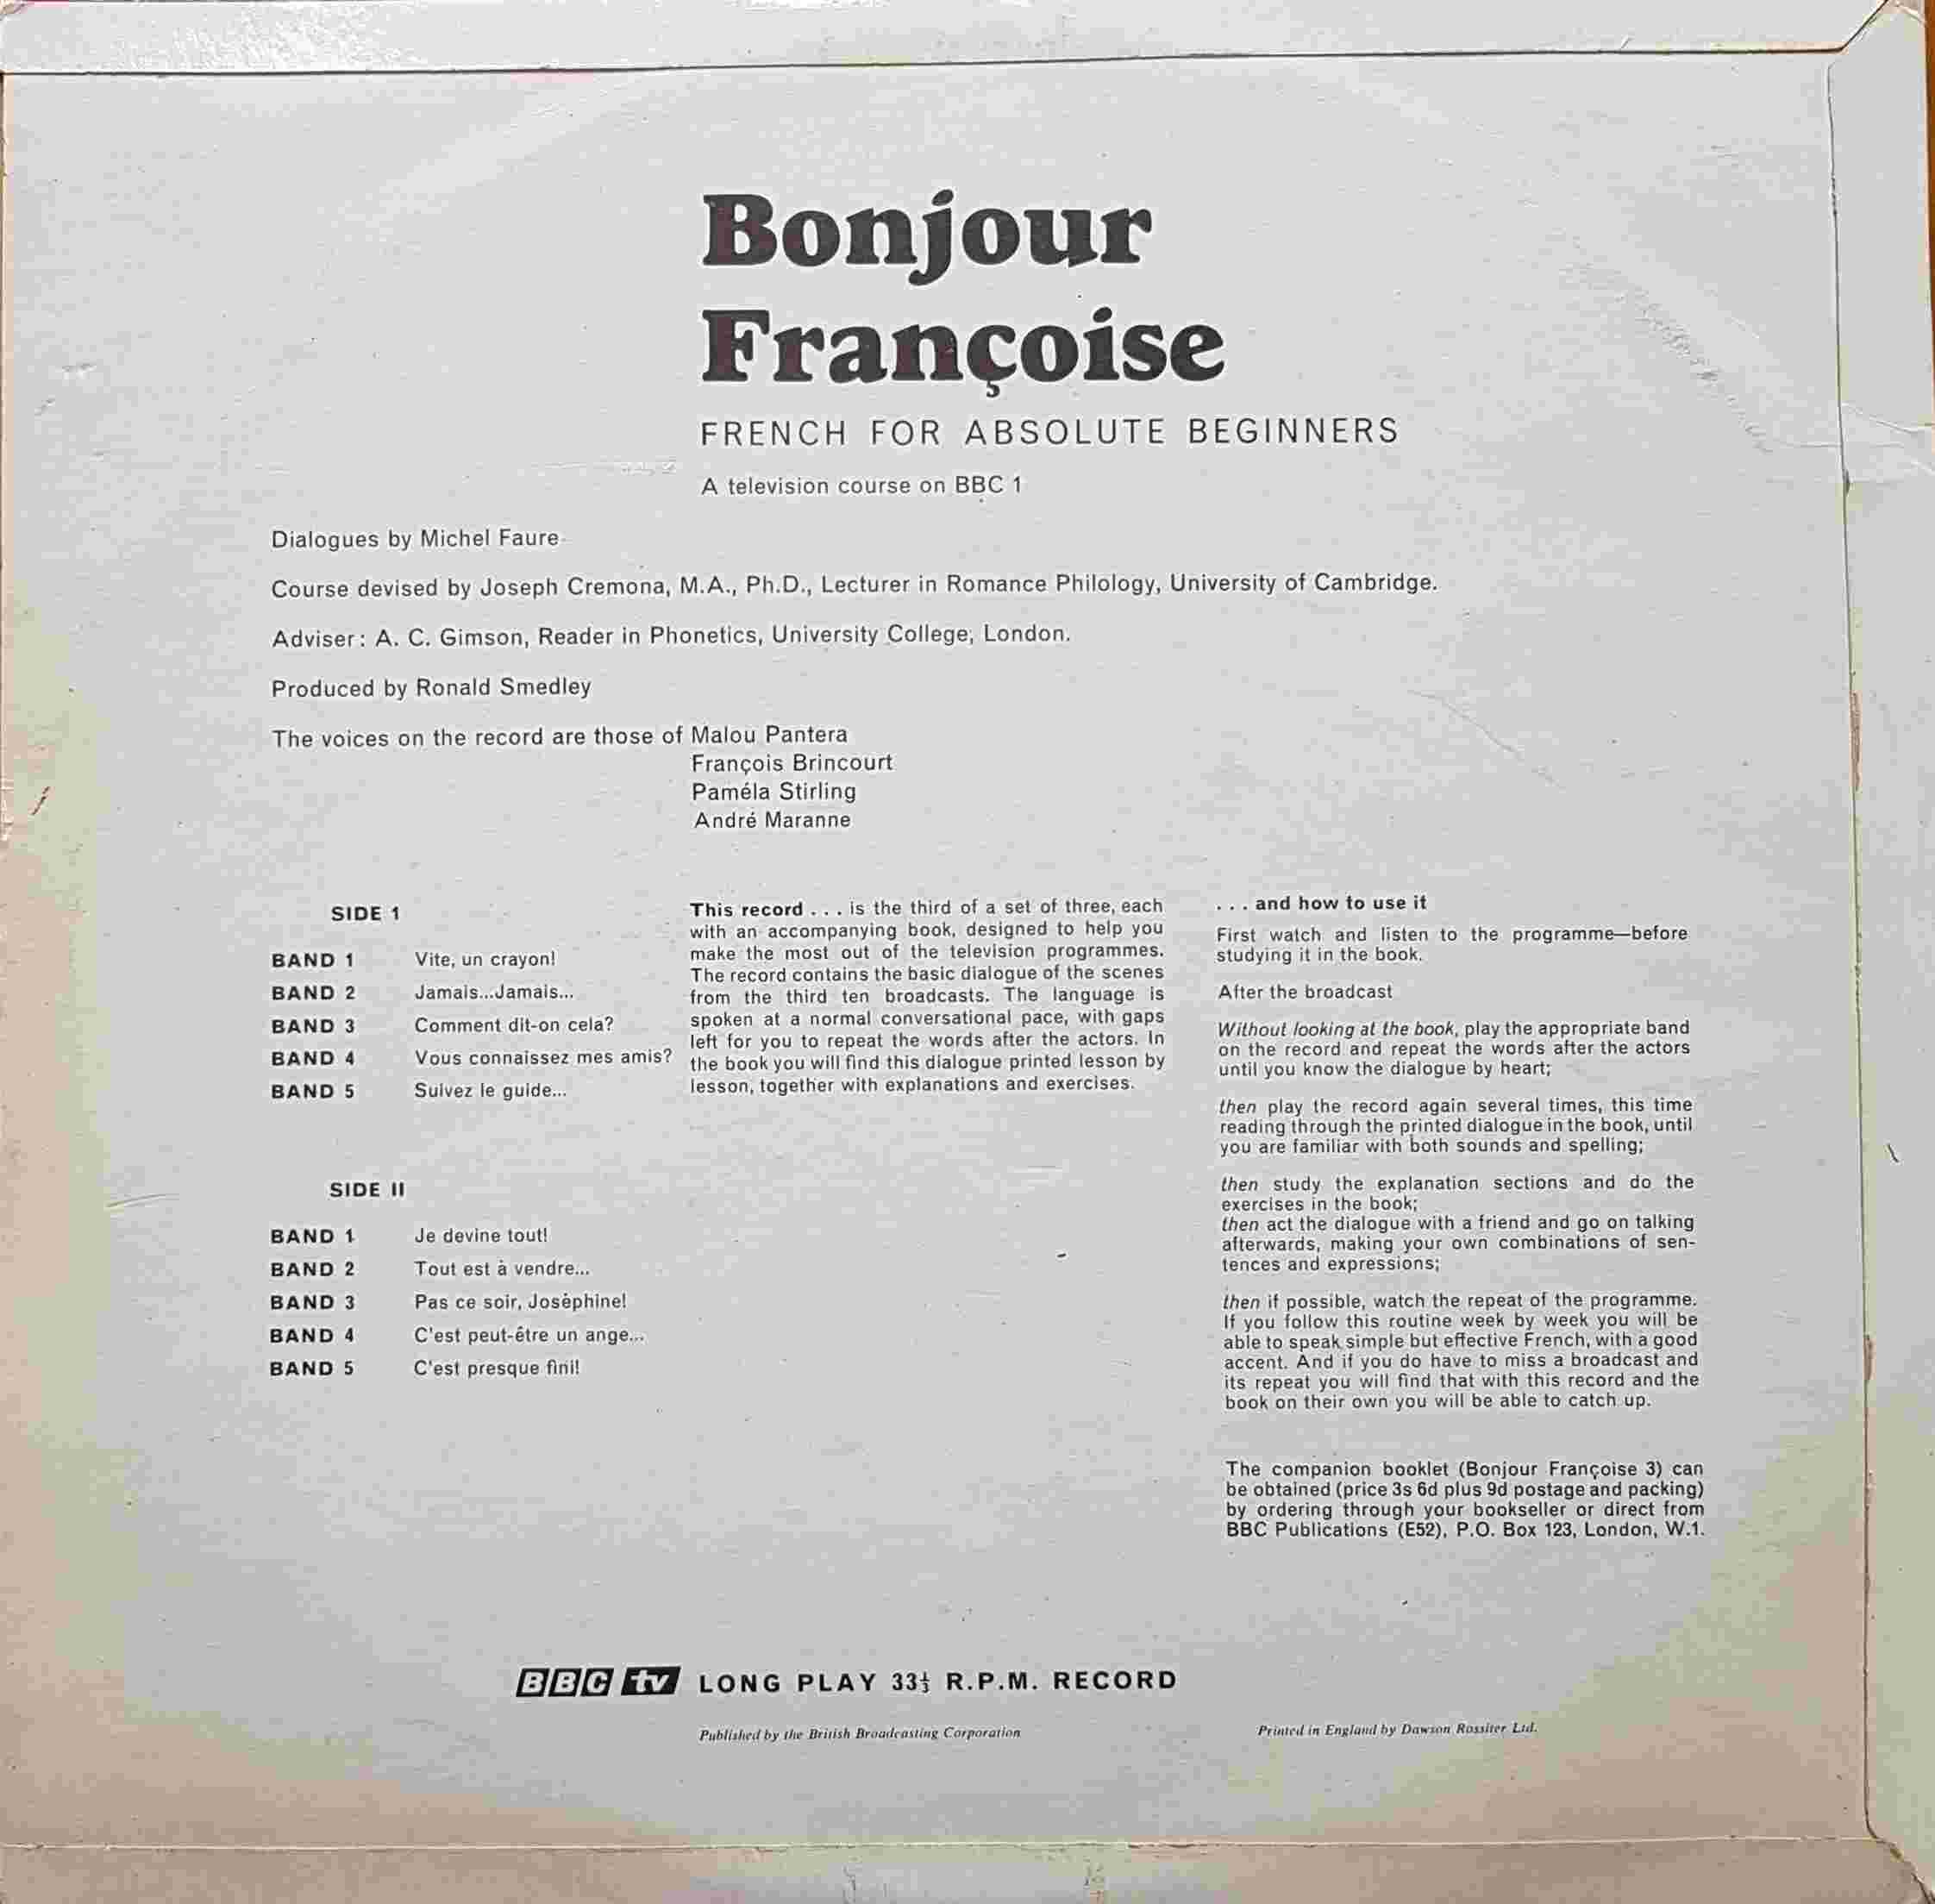 Picture of OP 45/46 Bonjour francoise - French for absolute beginners - Lessons 21 - 30 by artist Michel Faure / Joseph Cremona / A. C. Gimson from the BBC records and Tapes library